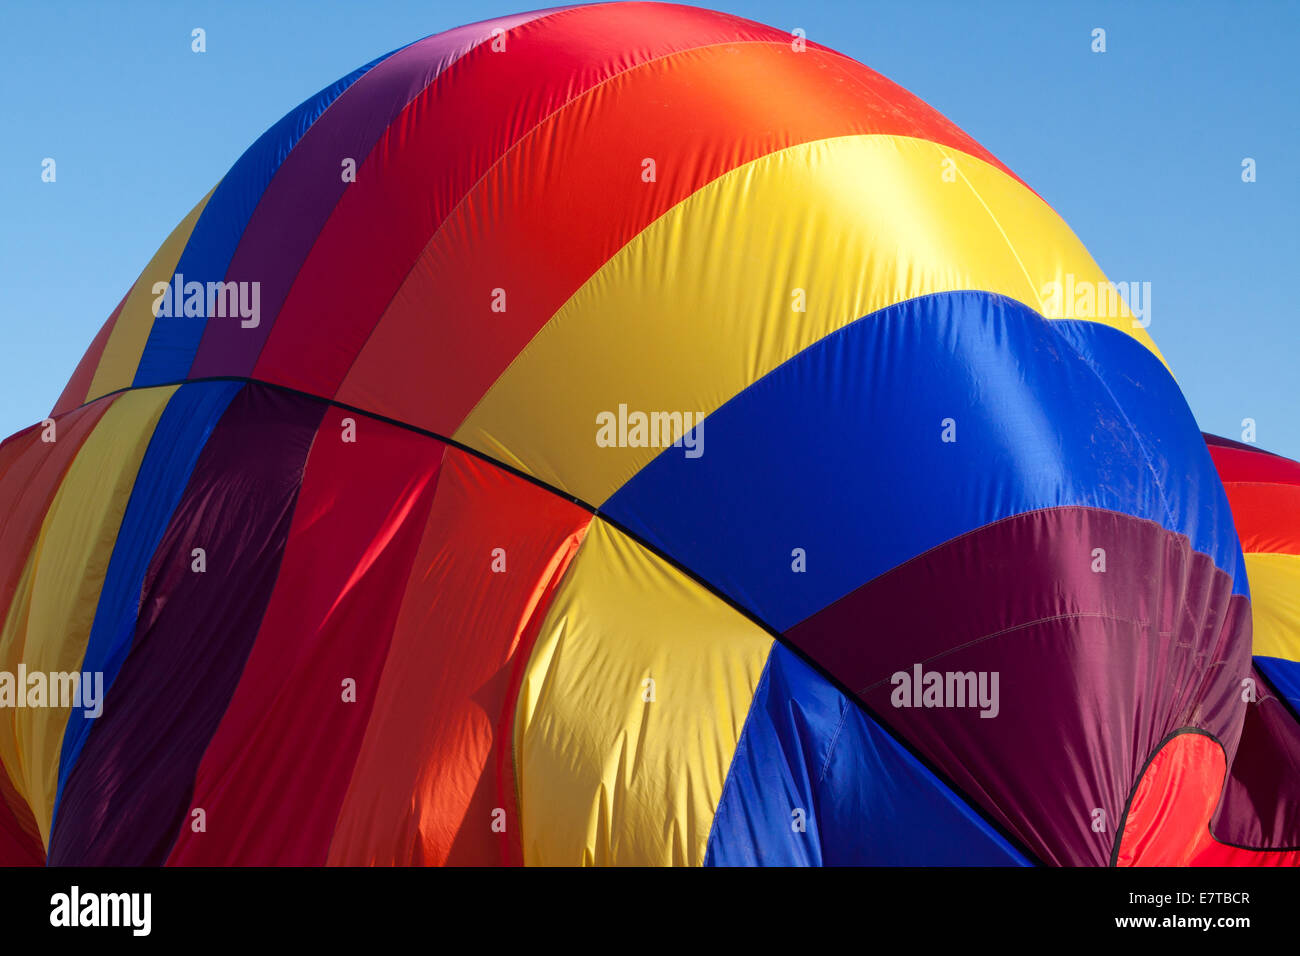 Canopy of a hot-air balloon being collapsed Stock Photo